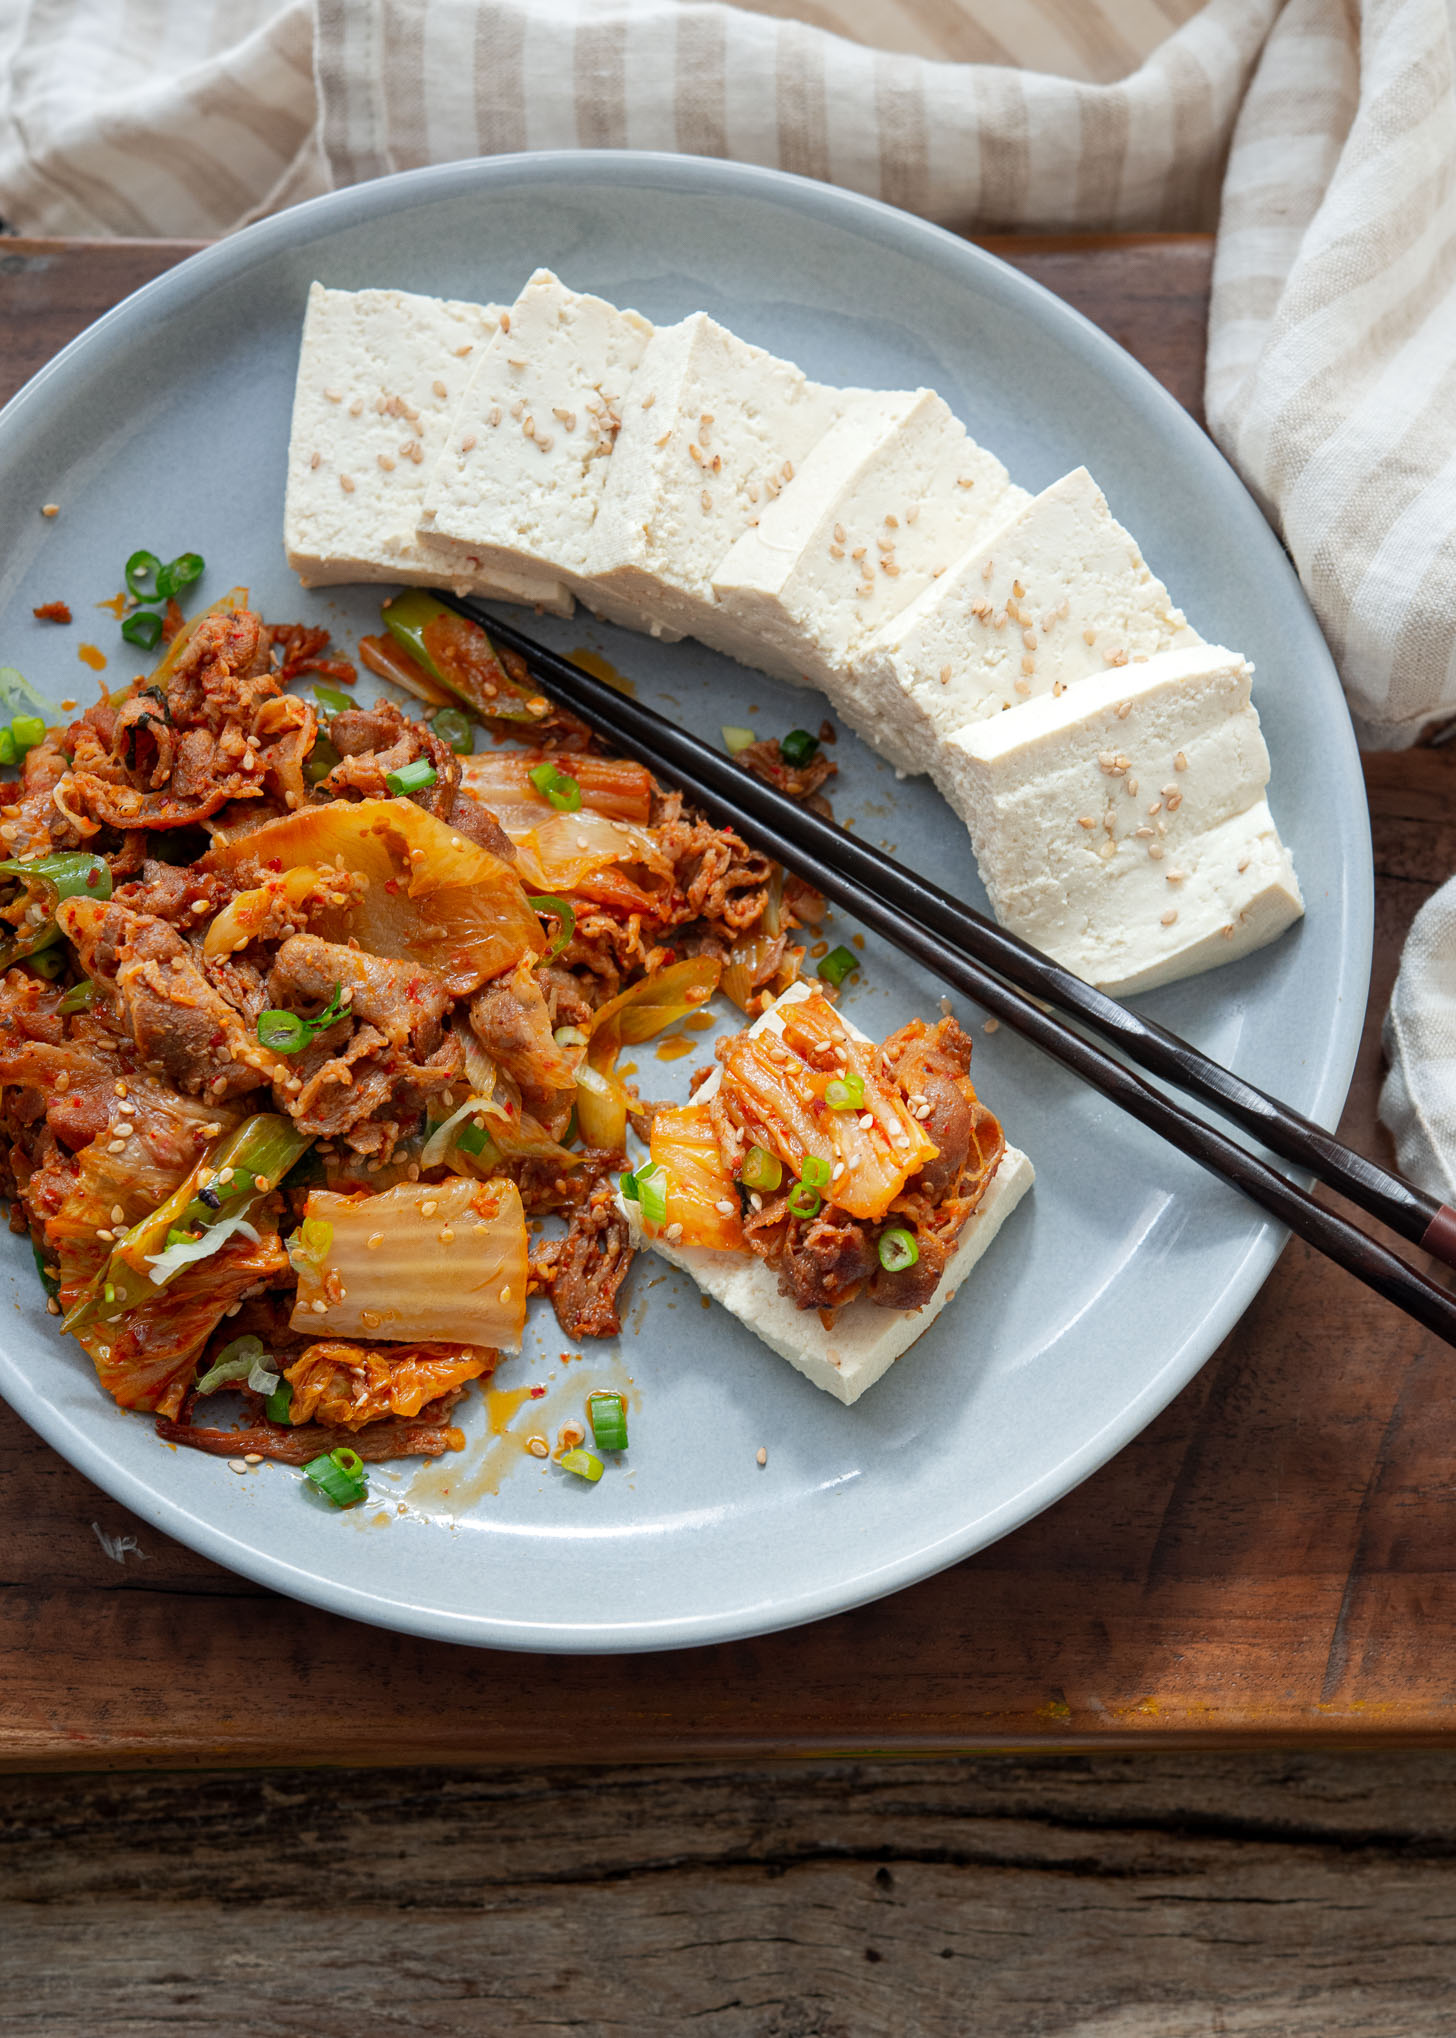 Tofu slices and kimchi pork stir fry is arranged on a serving plate.